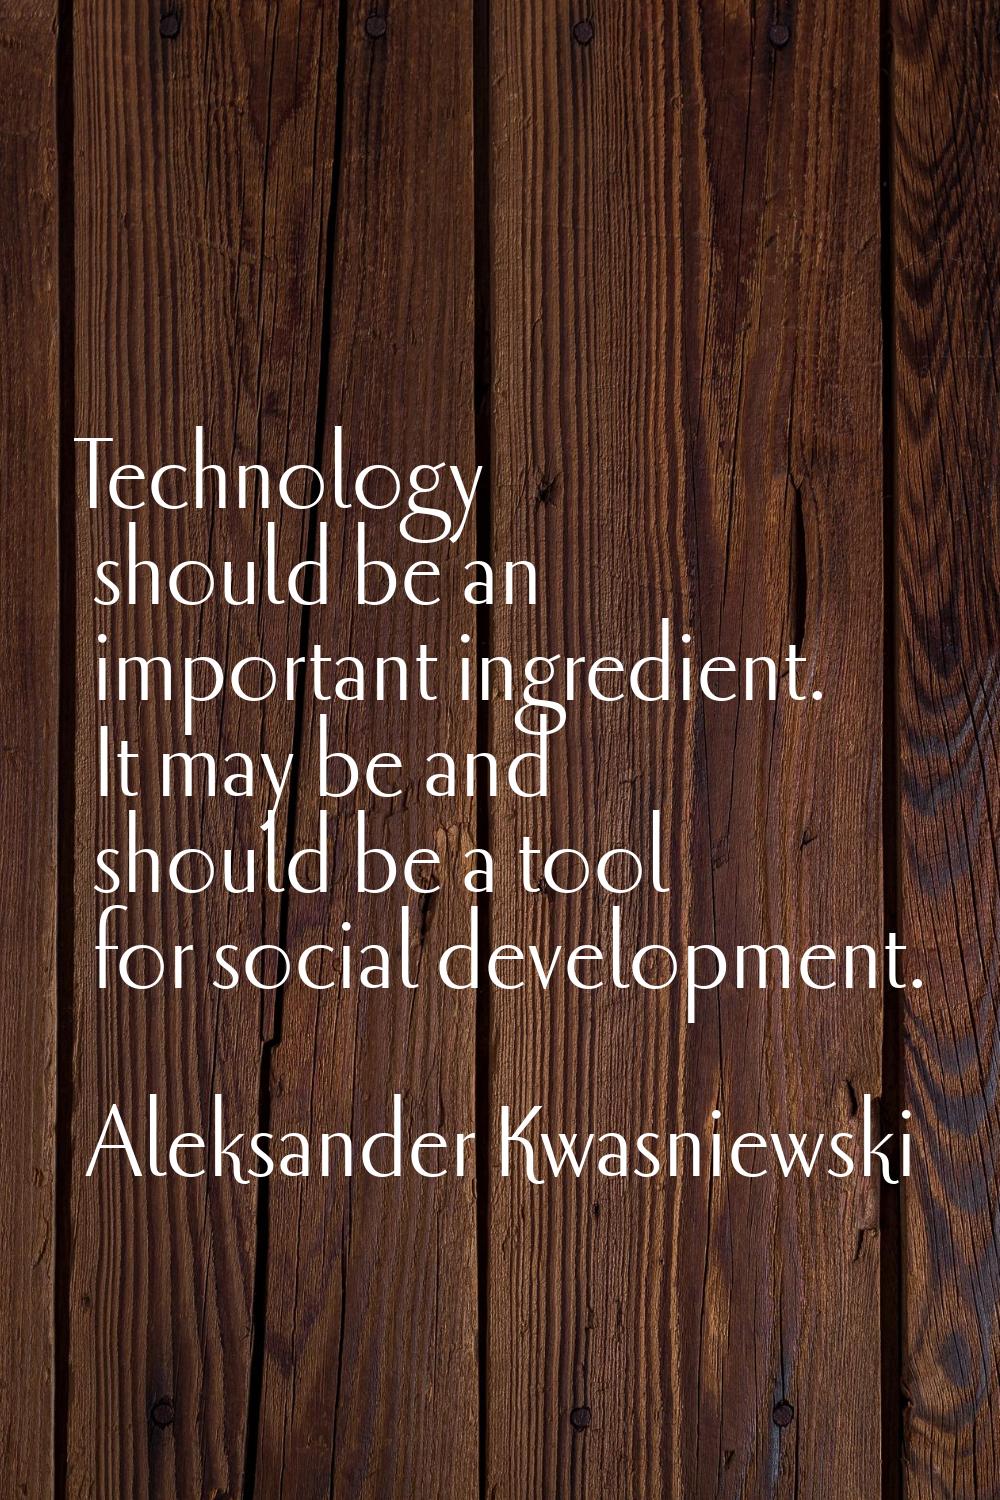 Technology should be an important ingredient. It may be and should be a tool for social development